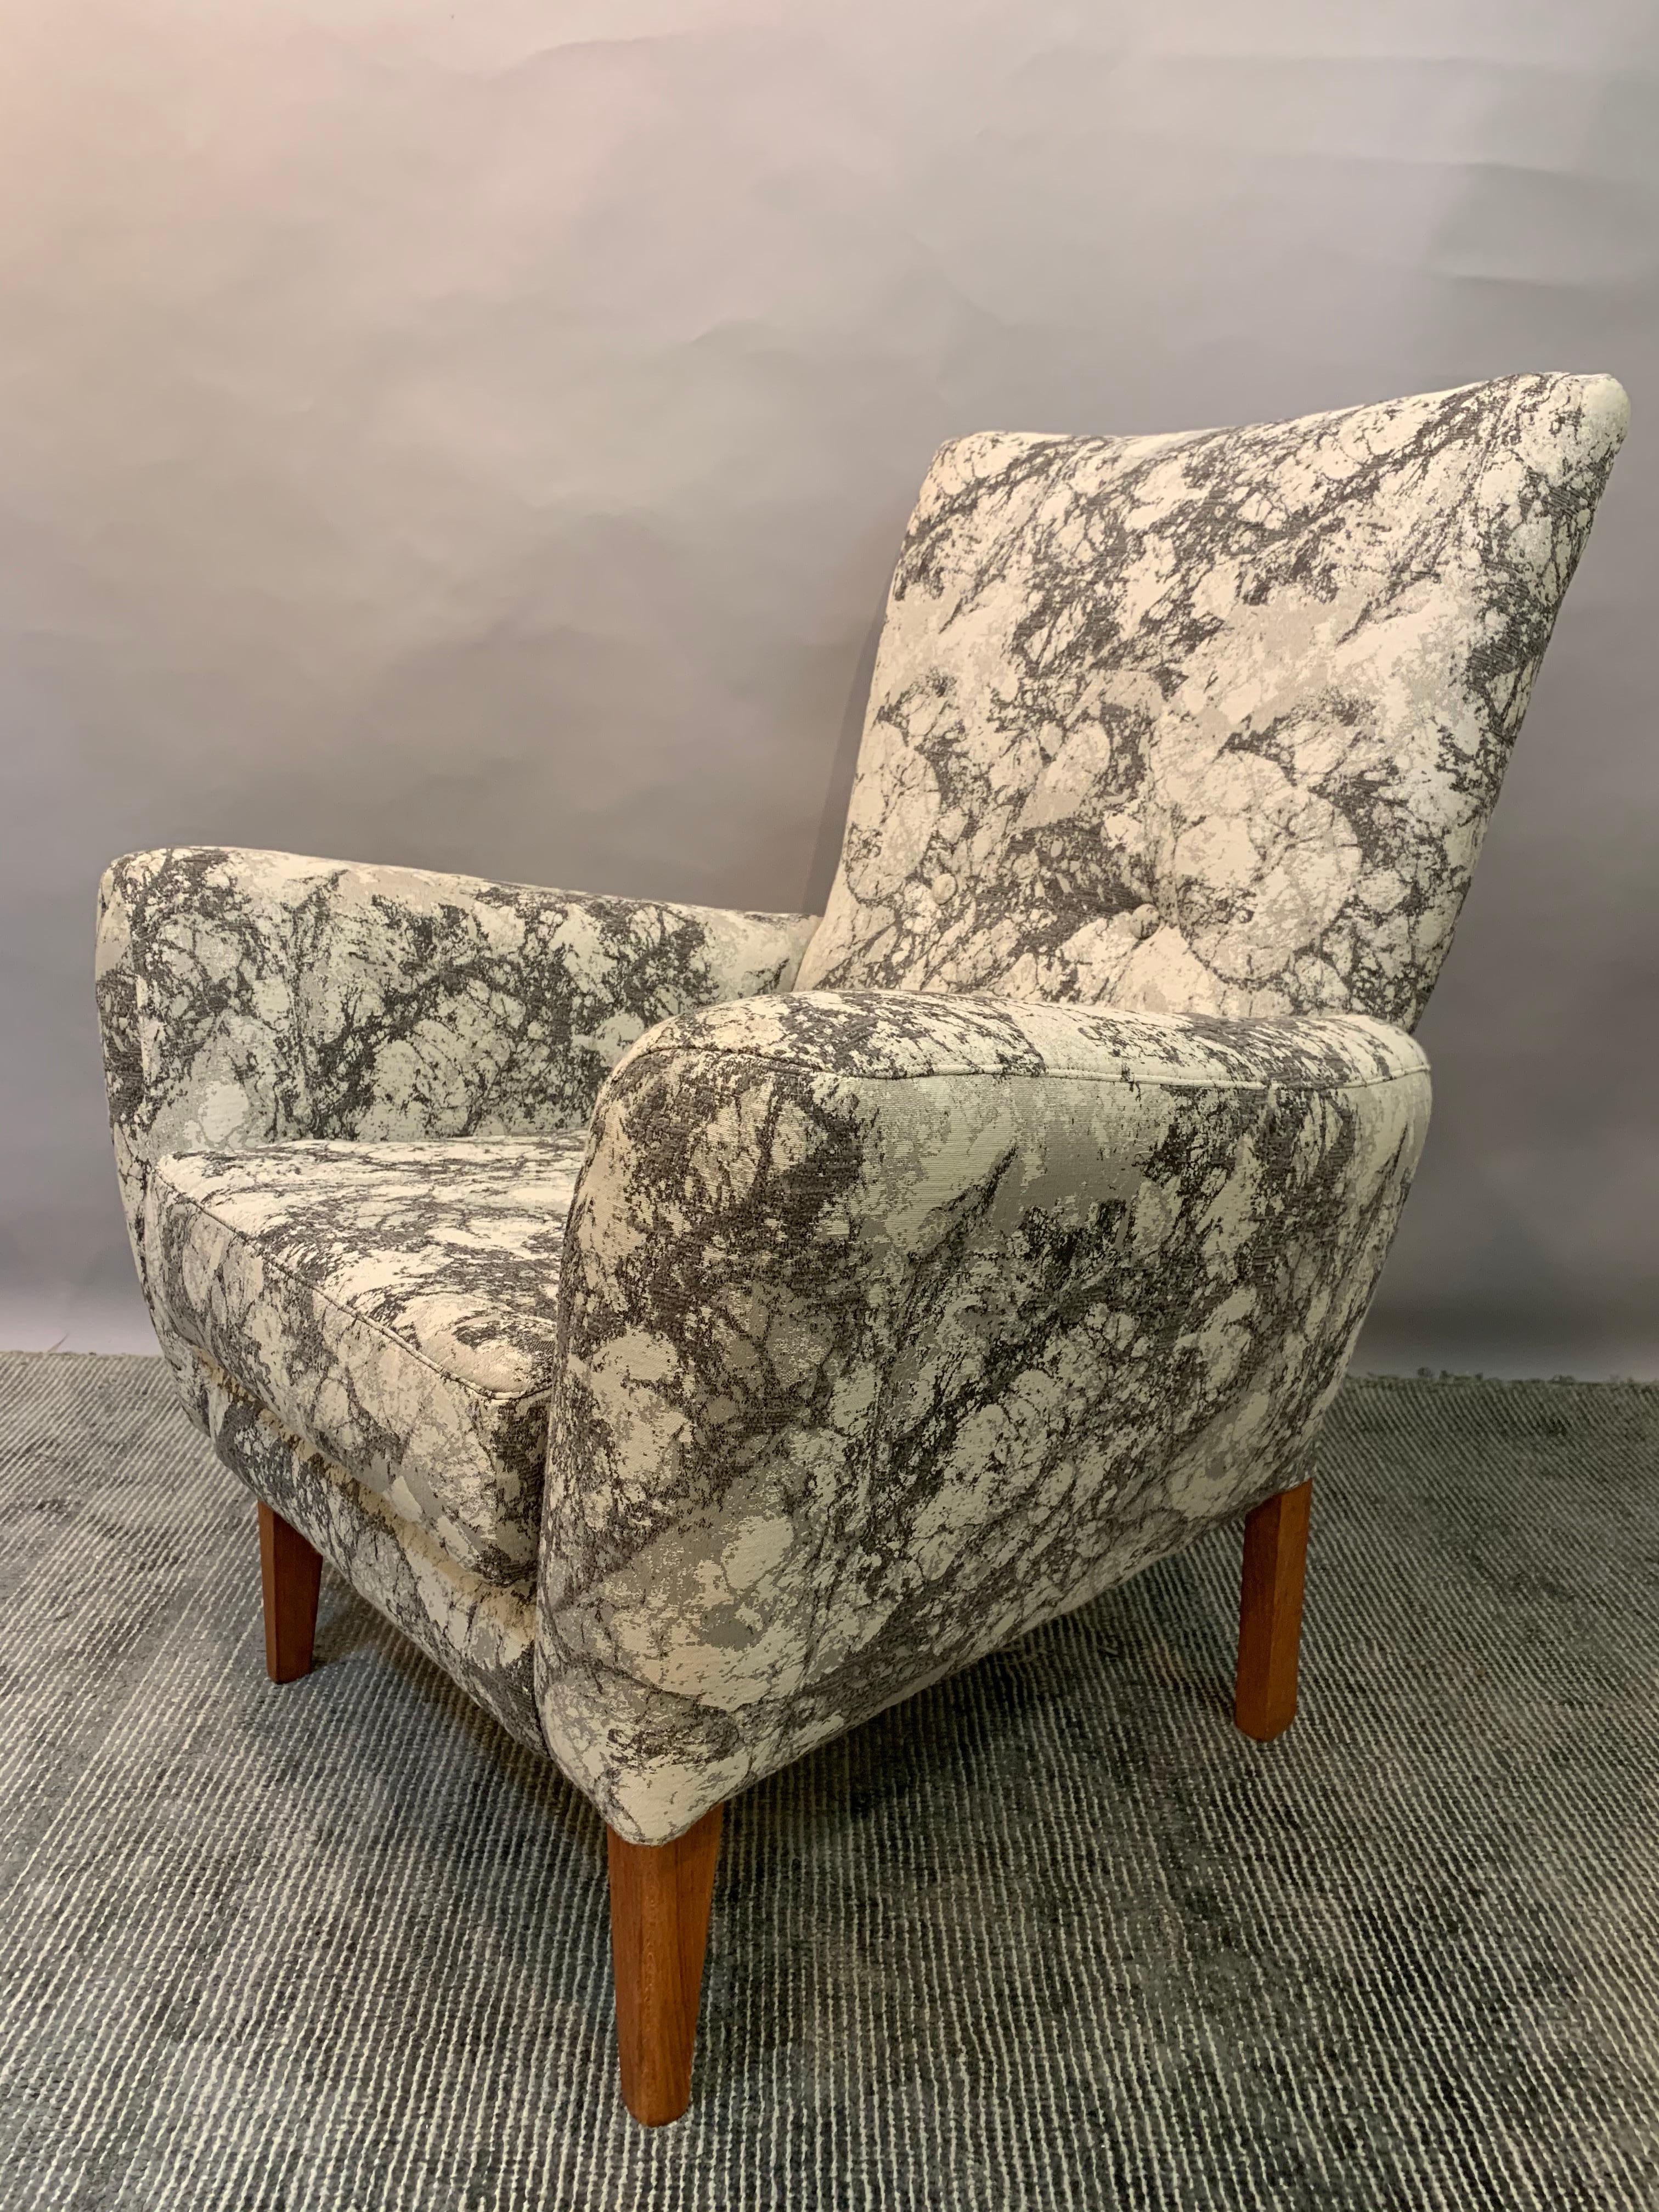 An elegant 1950s British made armchair newly reupholstered in a light and dark grey marble effect fabric. The chair sits on four polished and varnished square legs. In very good vintage condition. Perfect for every room of the house as a small,